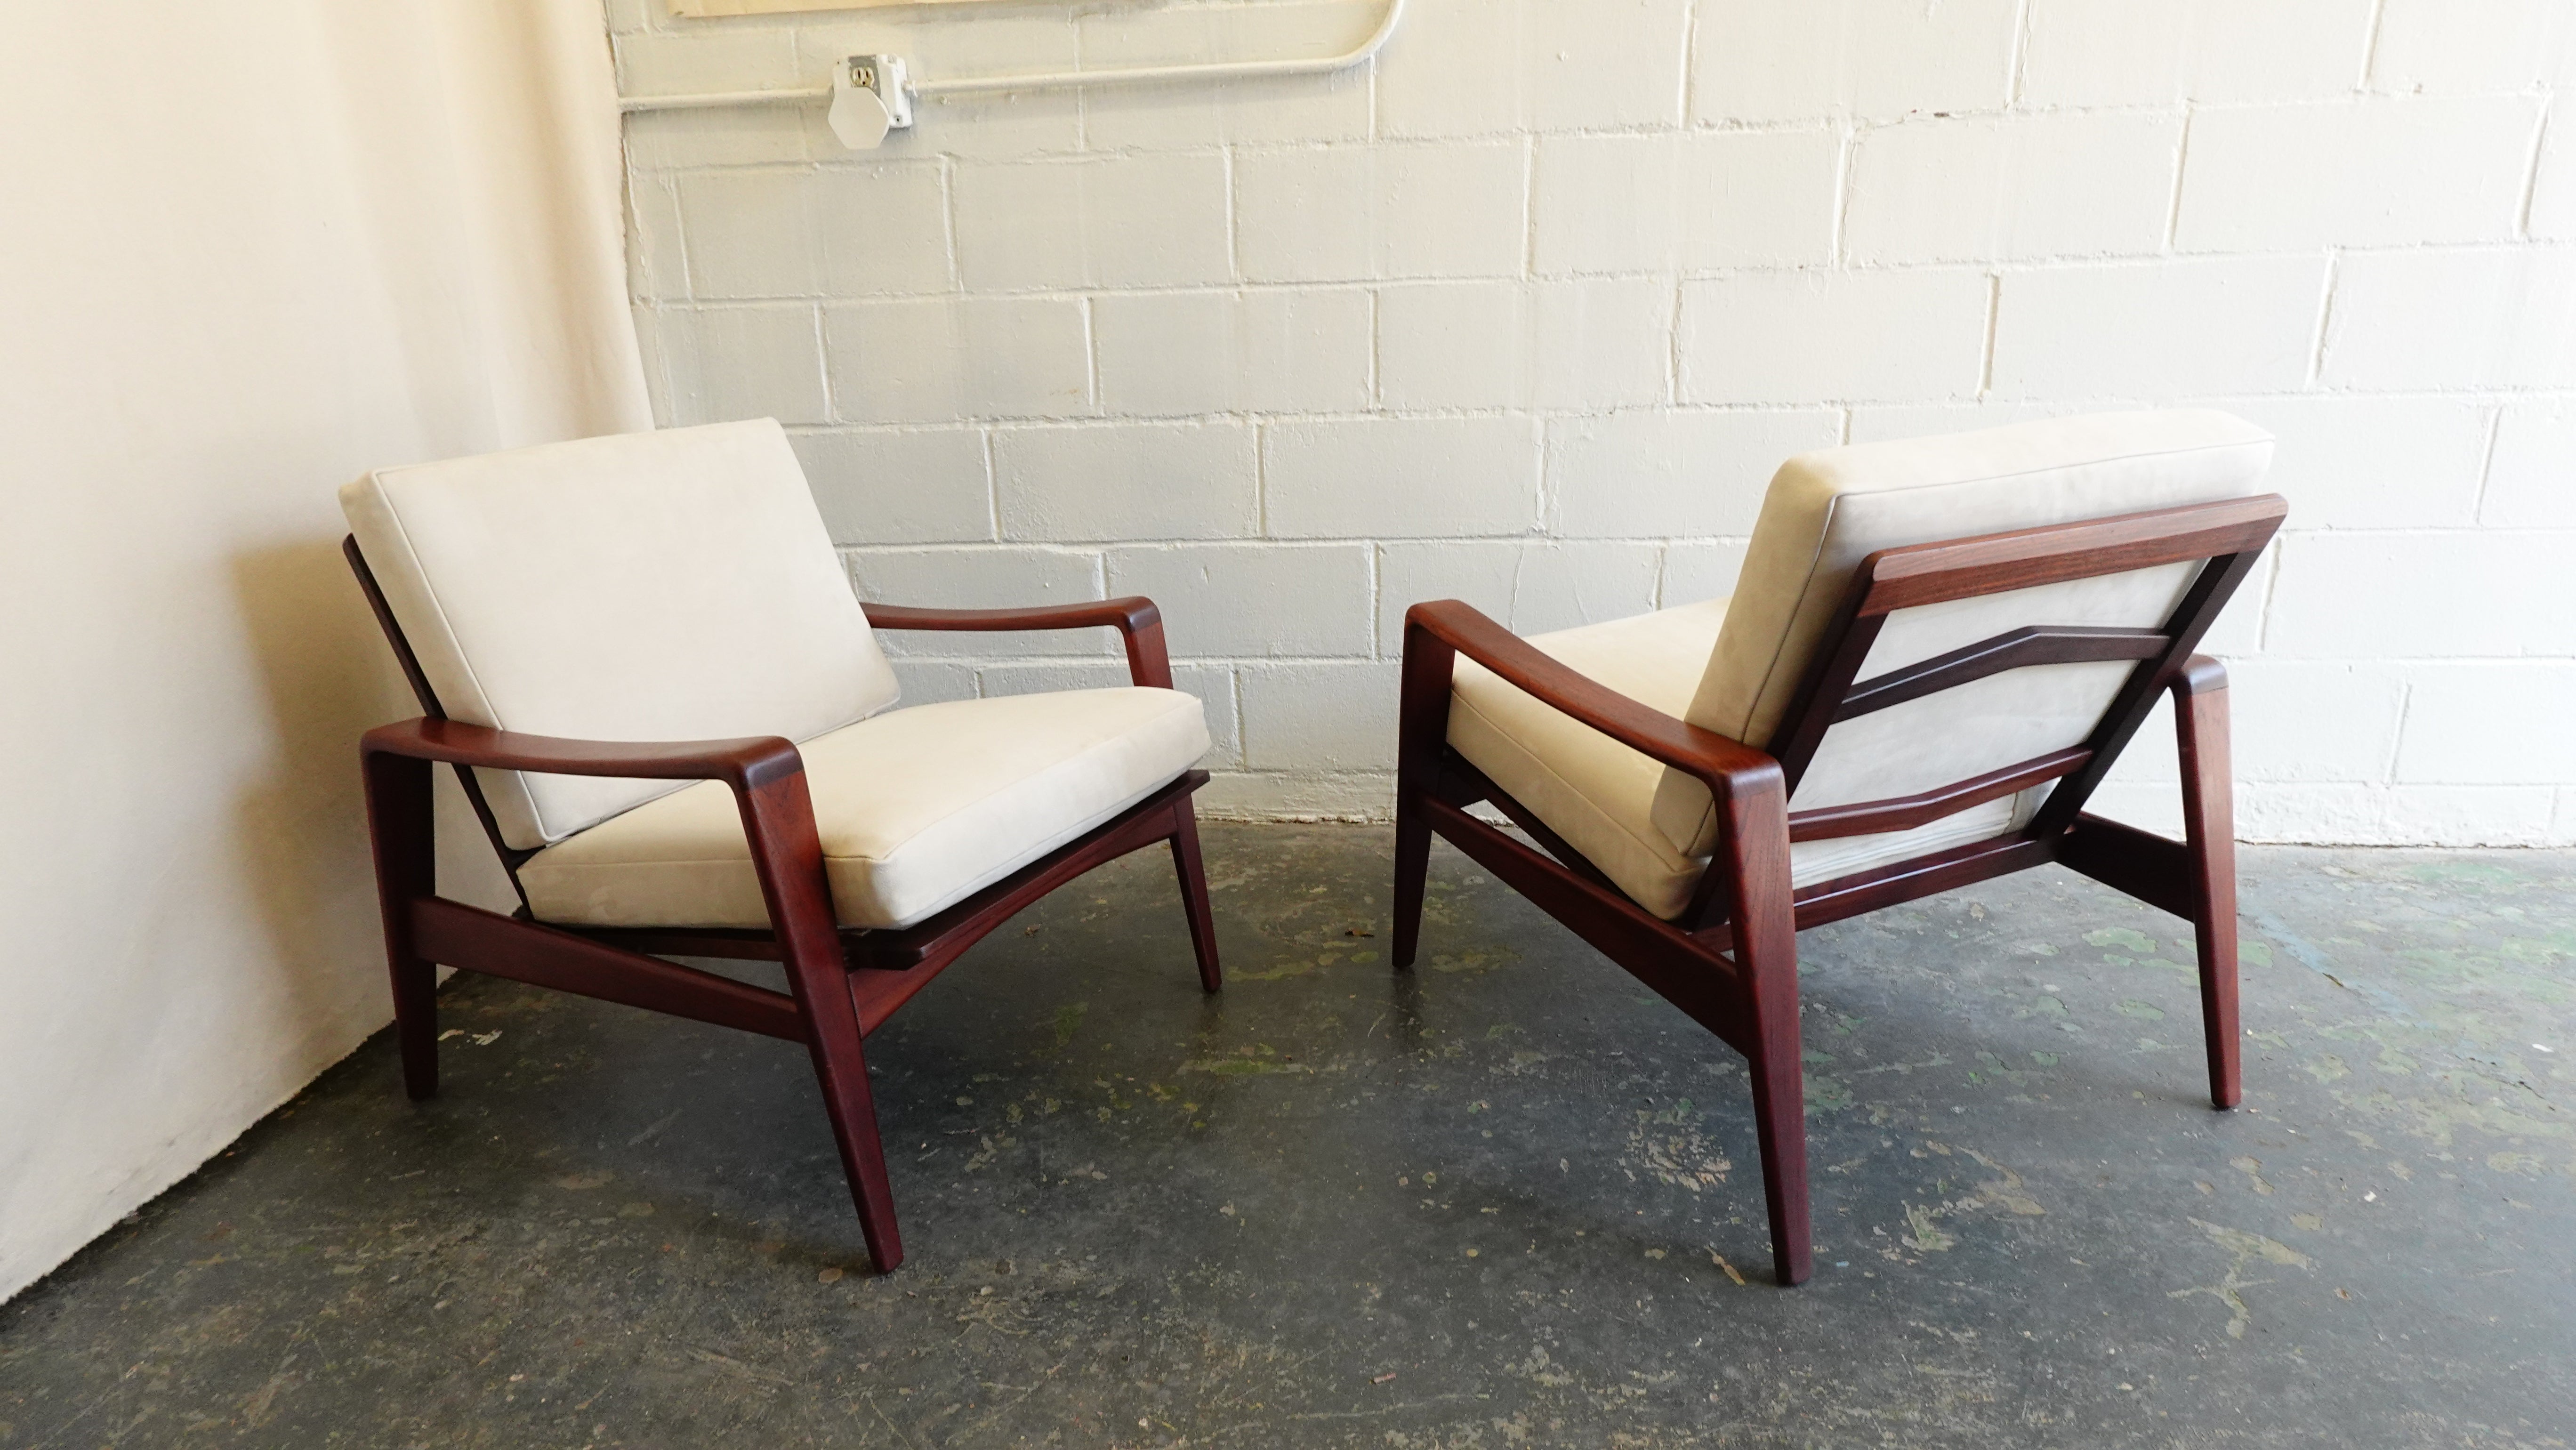 Supremely appointed pair of vintage Arne Wahl Iverson lounge chairs for Komfort, Denmark-1960s. Frames are in gorgeous vintage condition, cushions have been redone in a full grain raw bone-colored leather. Stunning rich contrast, excellent